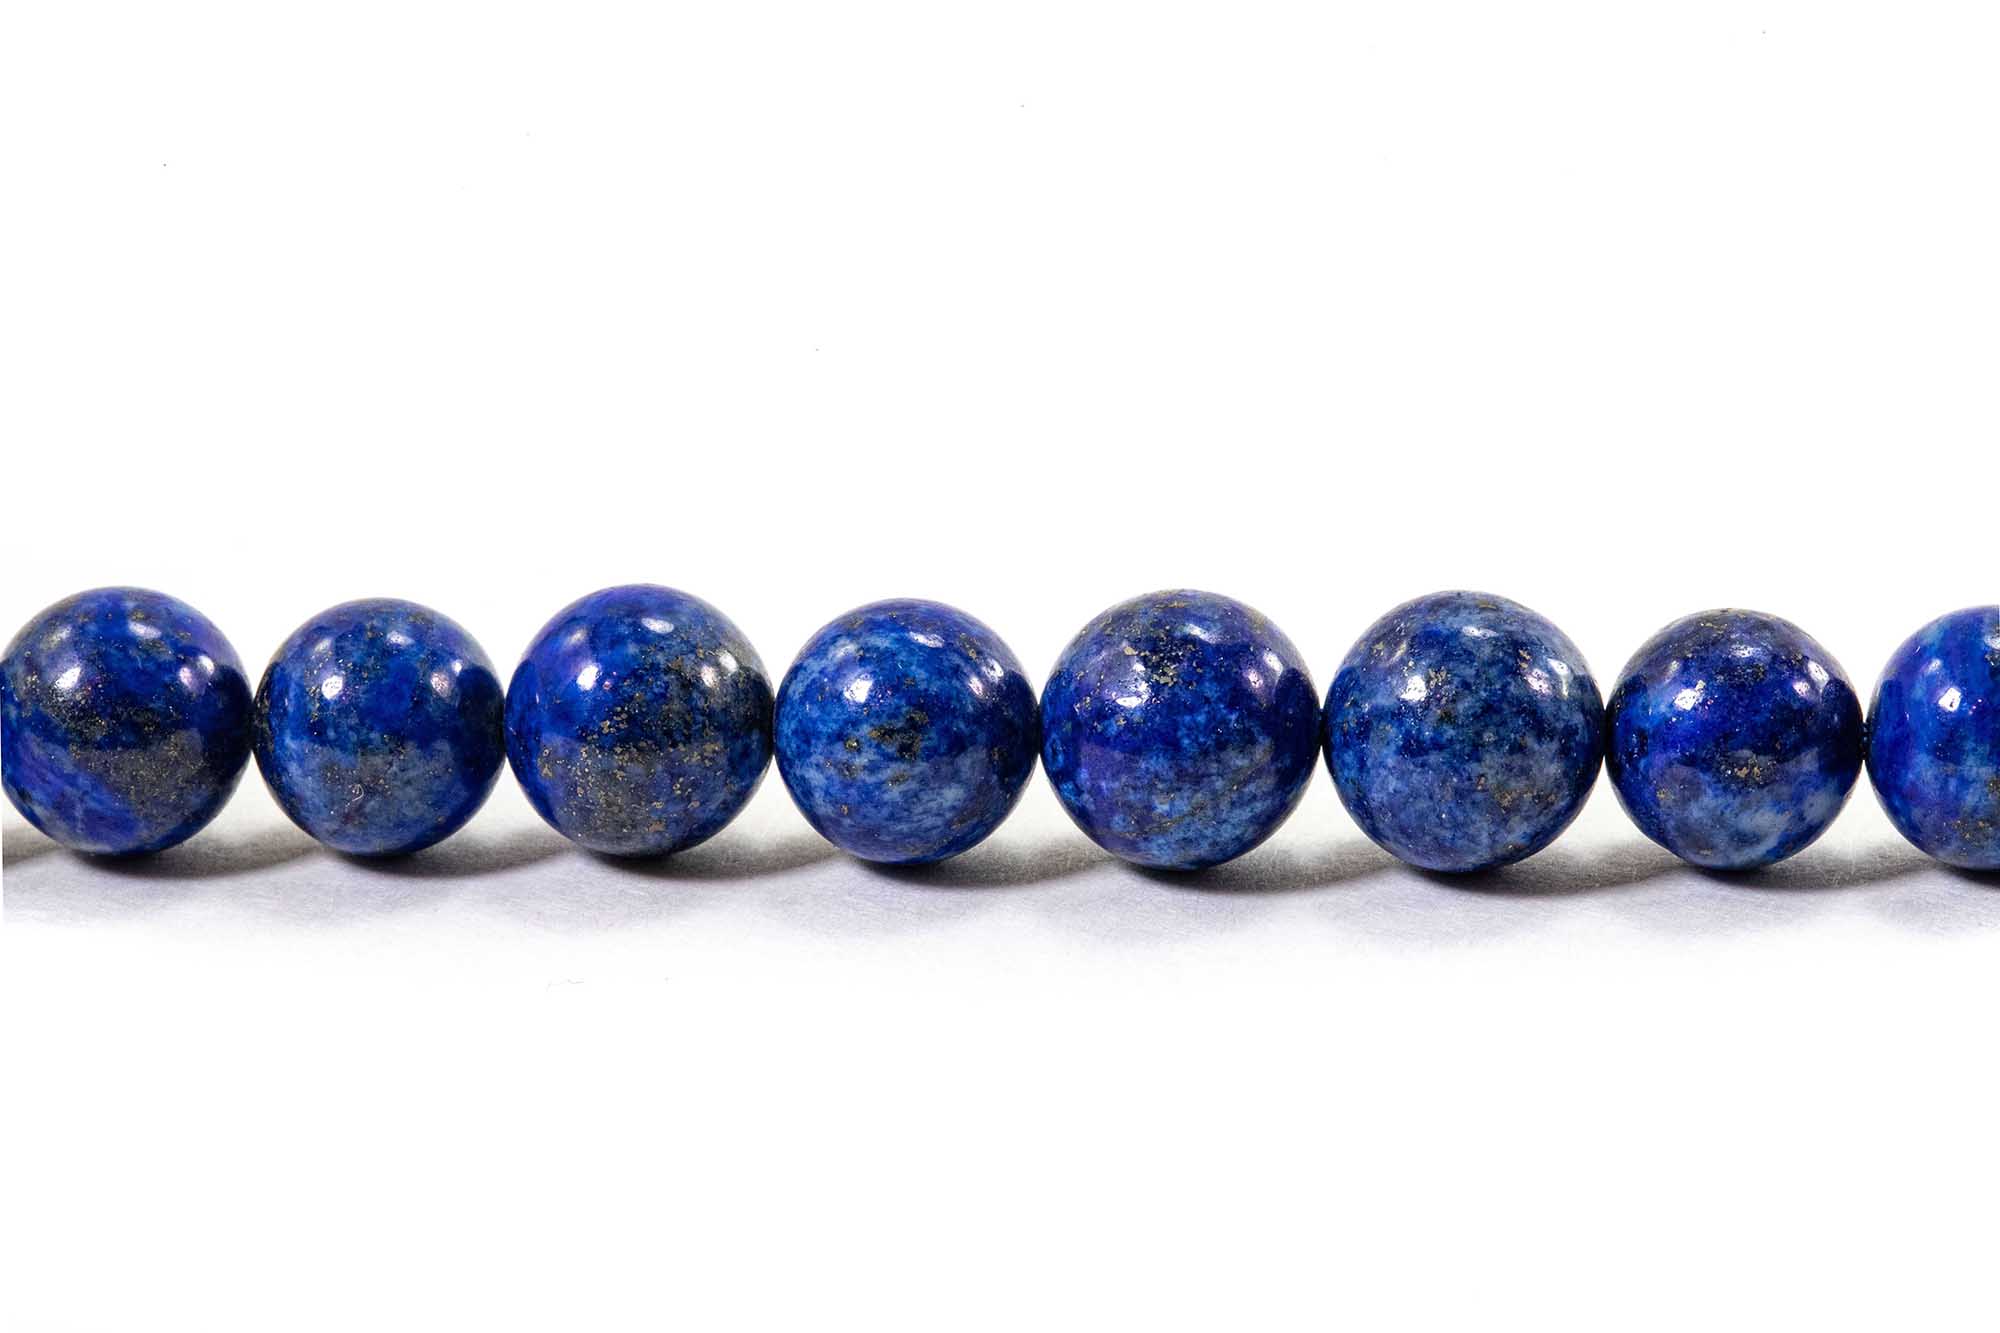 Lapis Lazuli Beads (8 mm or 10 mm)- Crystal Dreams